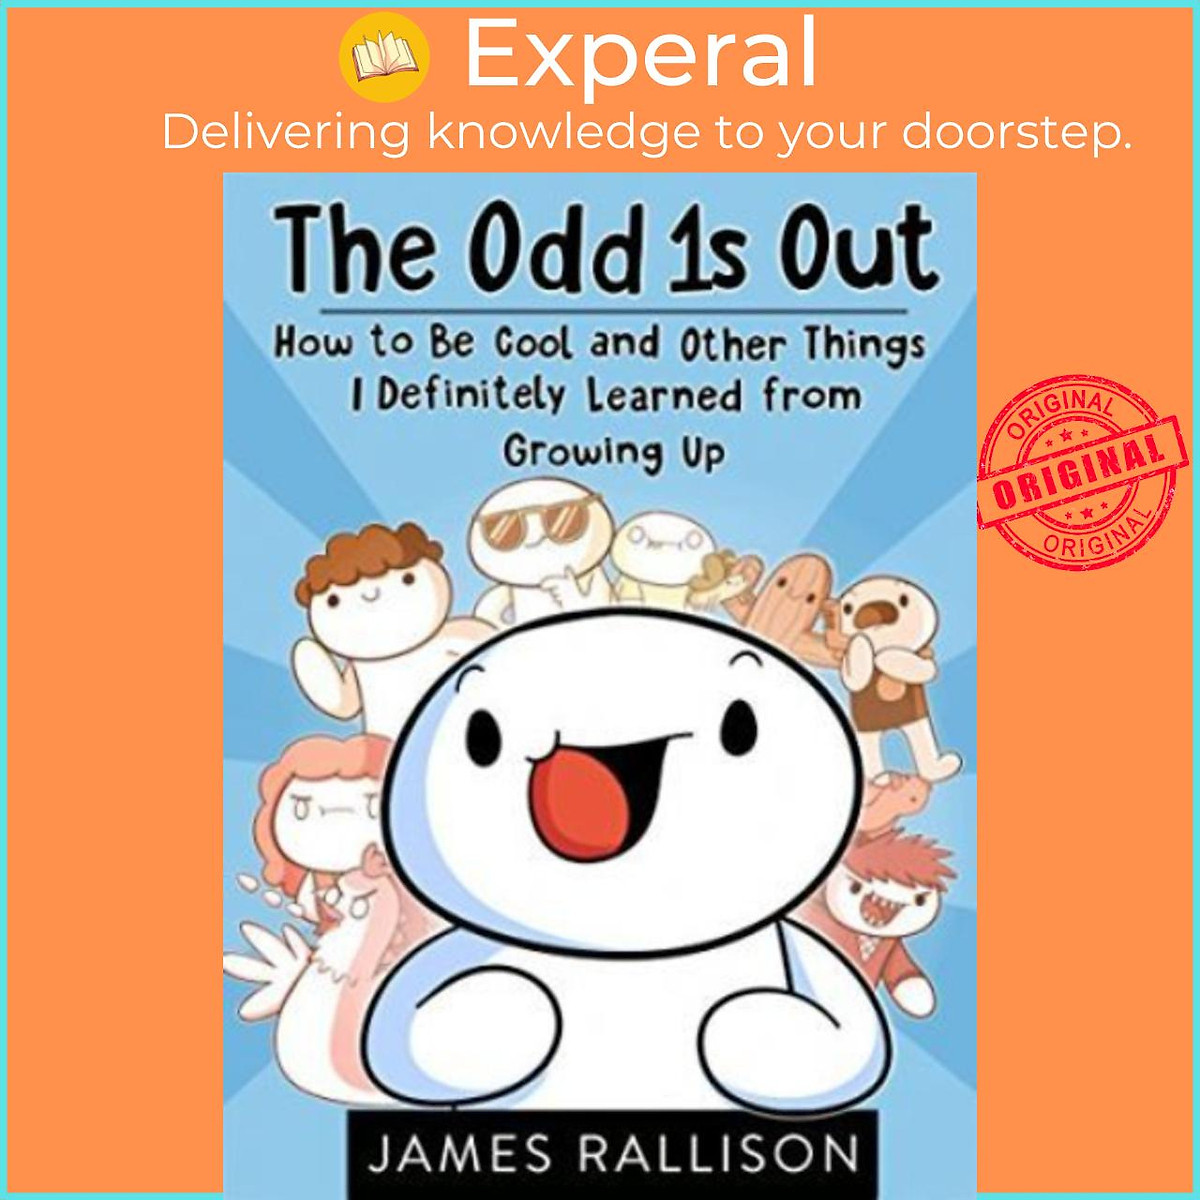 Sách - The Odd 1s Out : How to Be Cool and Other Things I Definitely Learned f by James Rallison (UK edition, paperback)